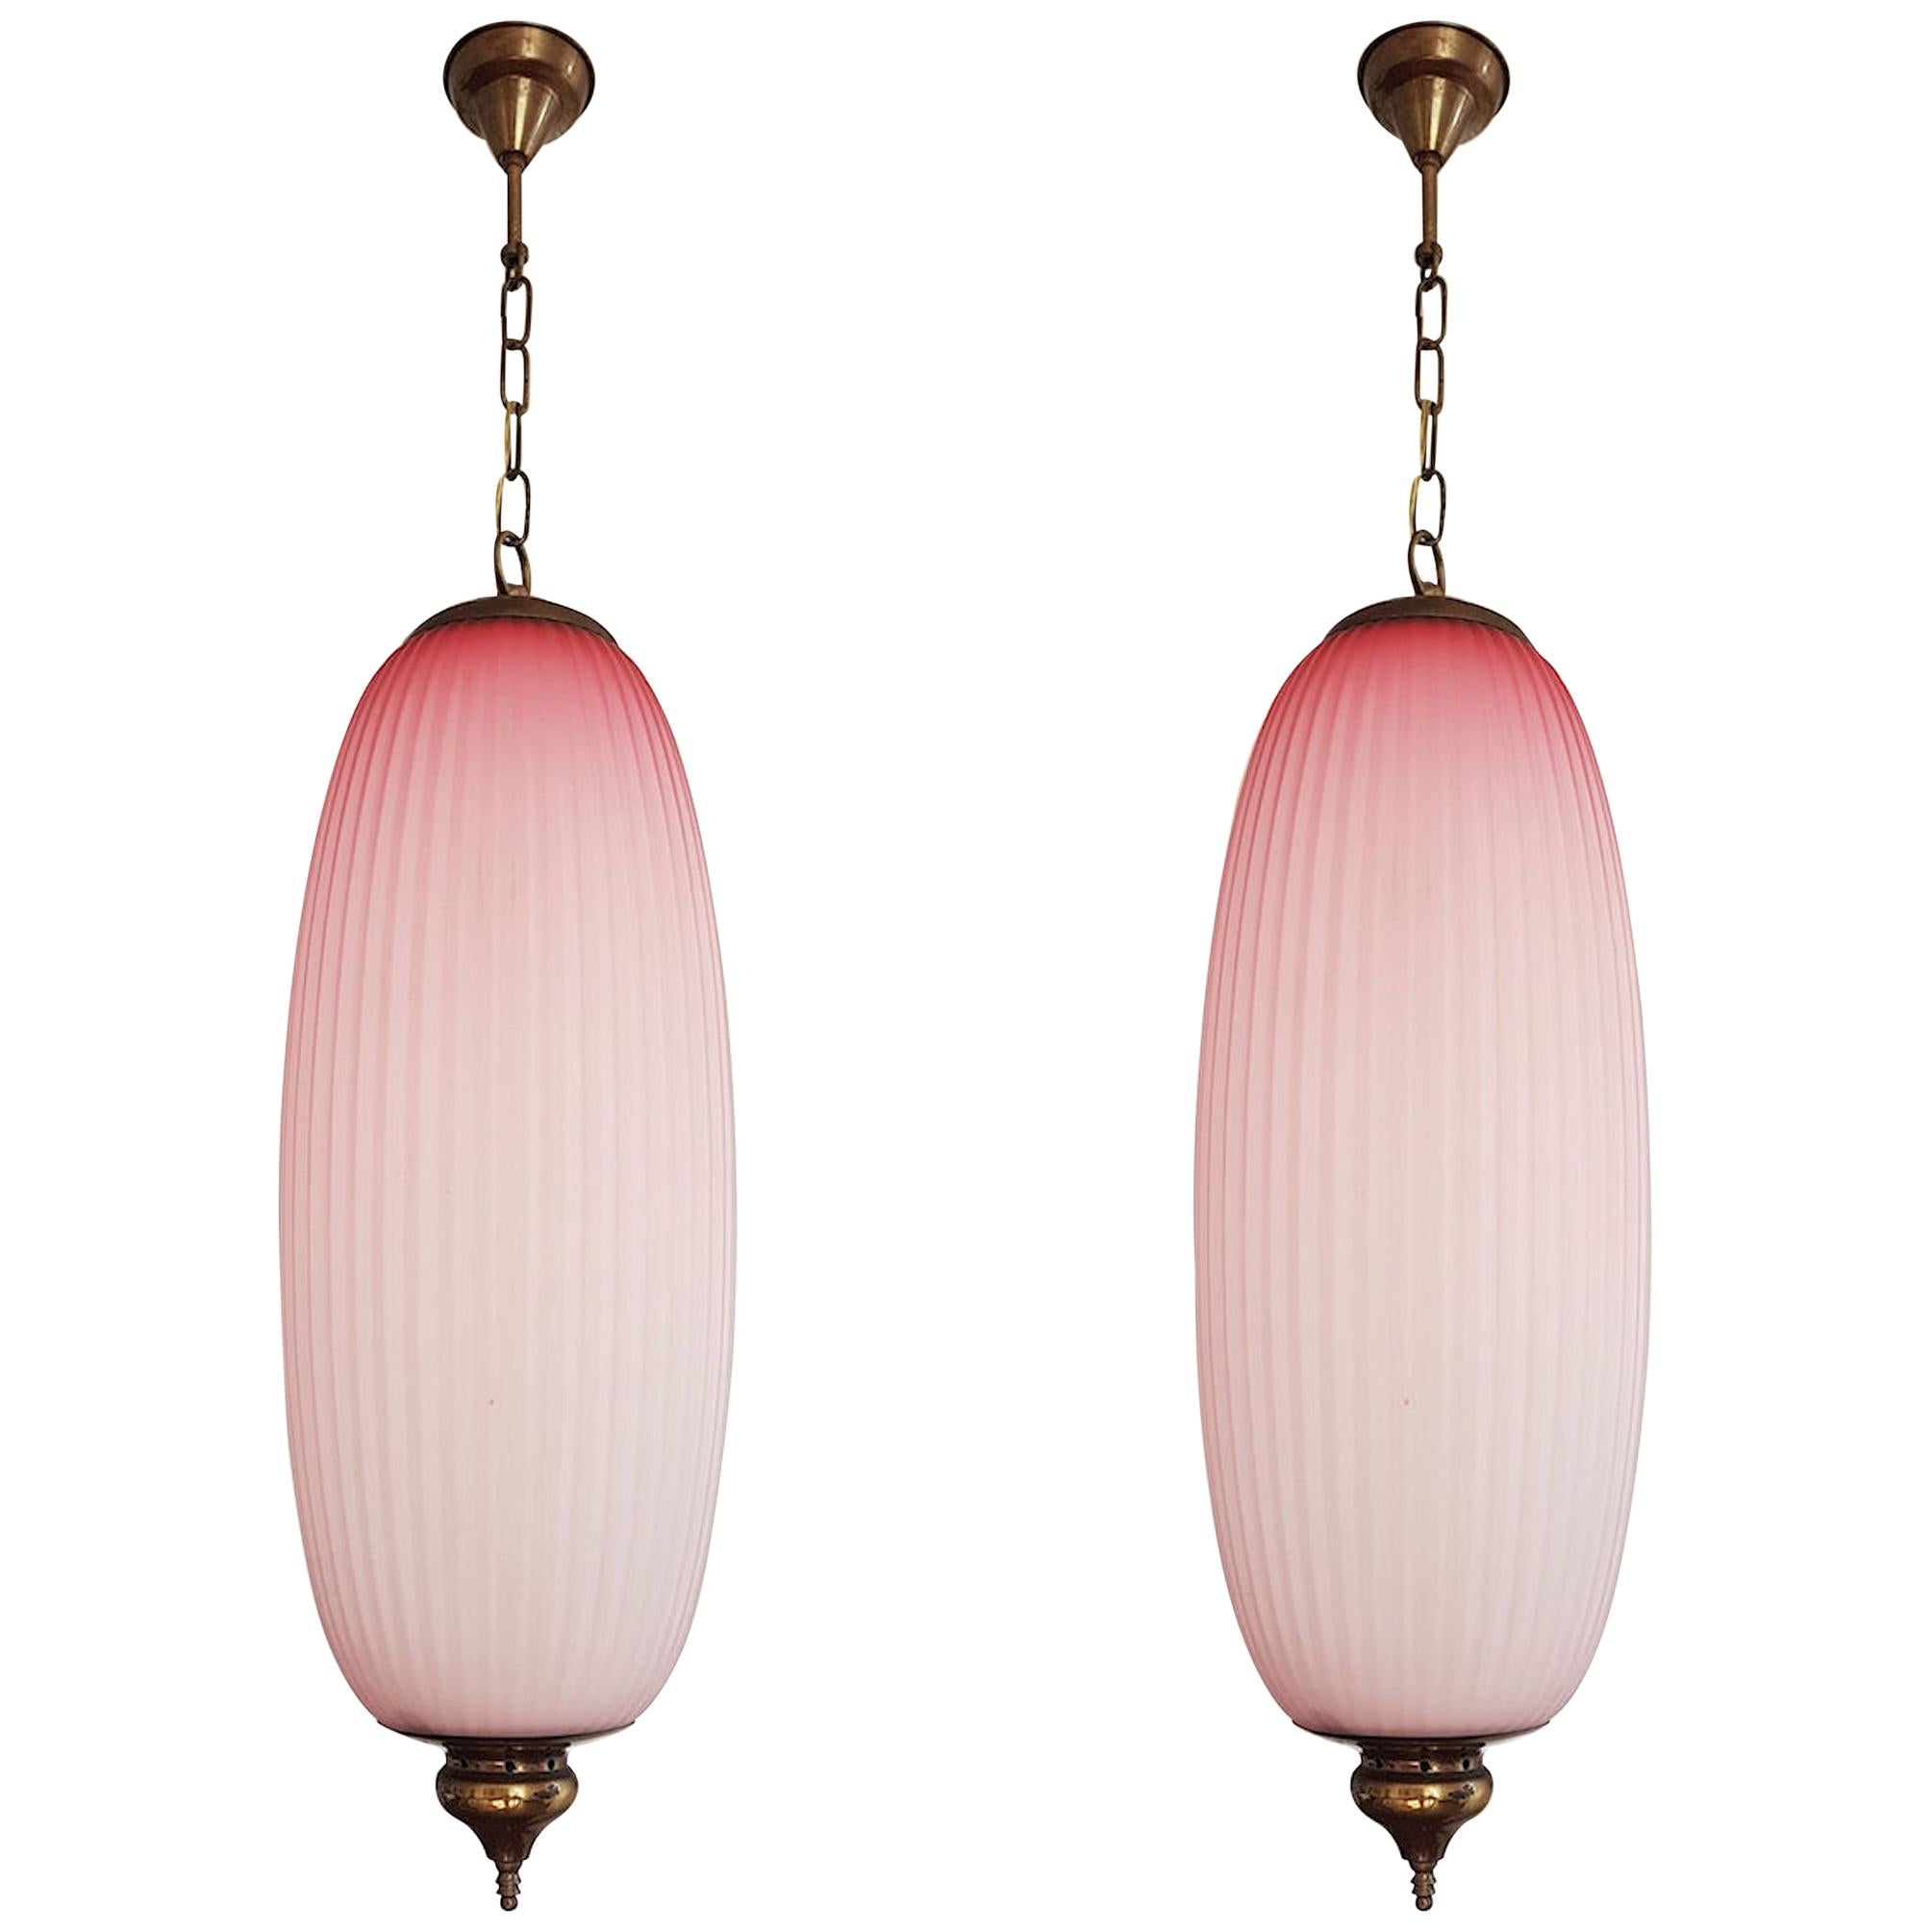 Pair of Pink Mid-Century Modern Glass Chandeliers, Caccia Dominioni Style, 1960s